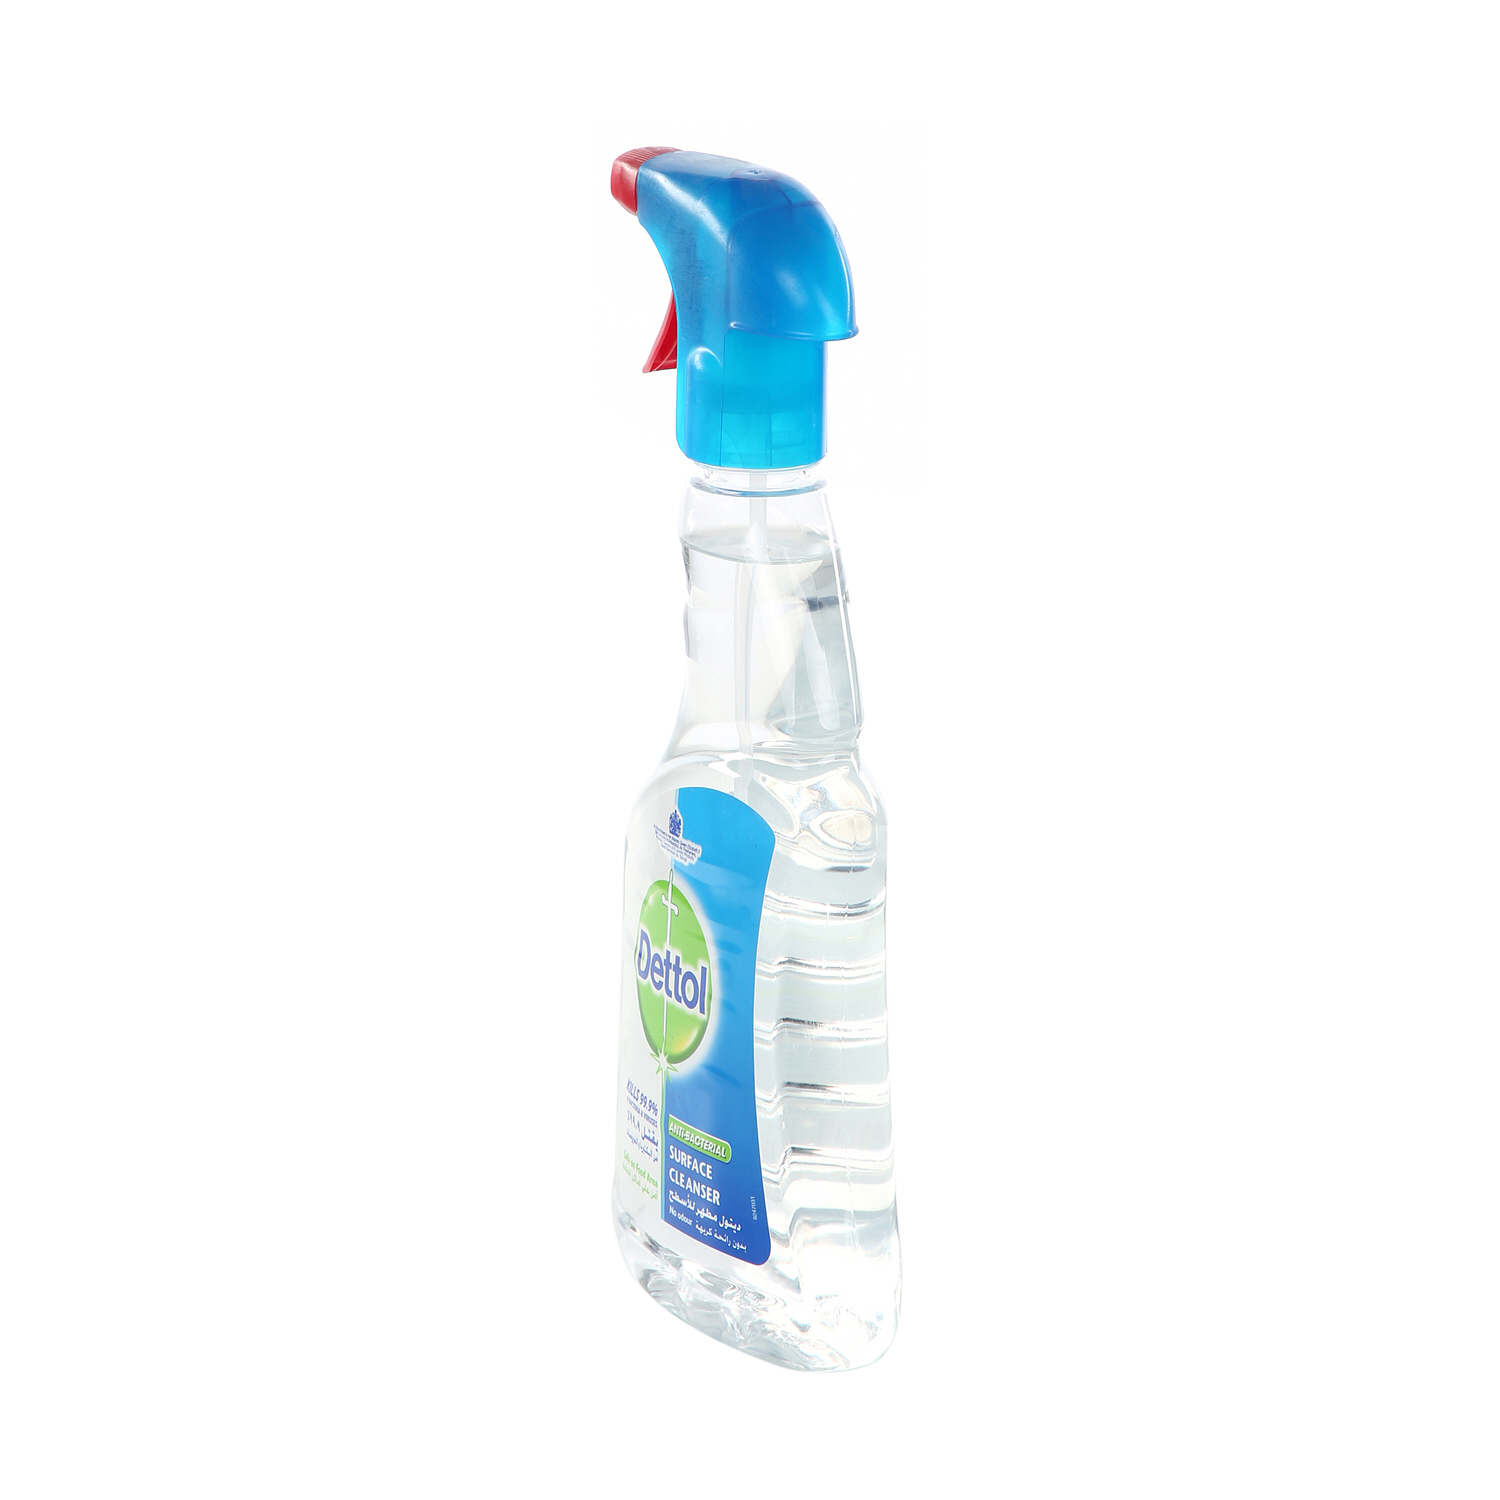 Dettol Antibacterial Surface Cleaner 500 ml